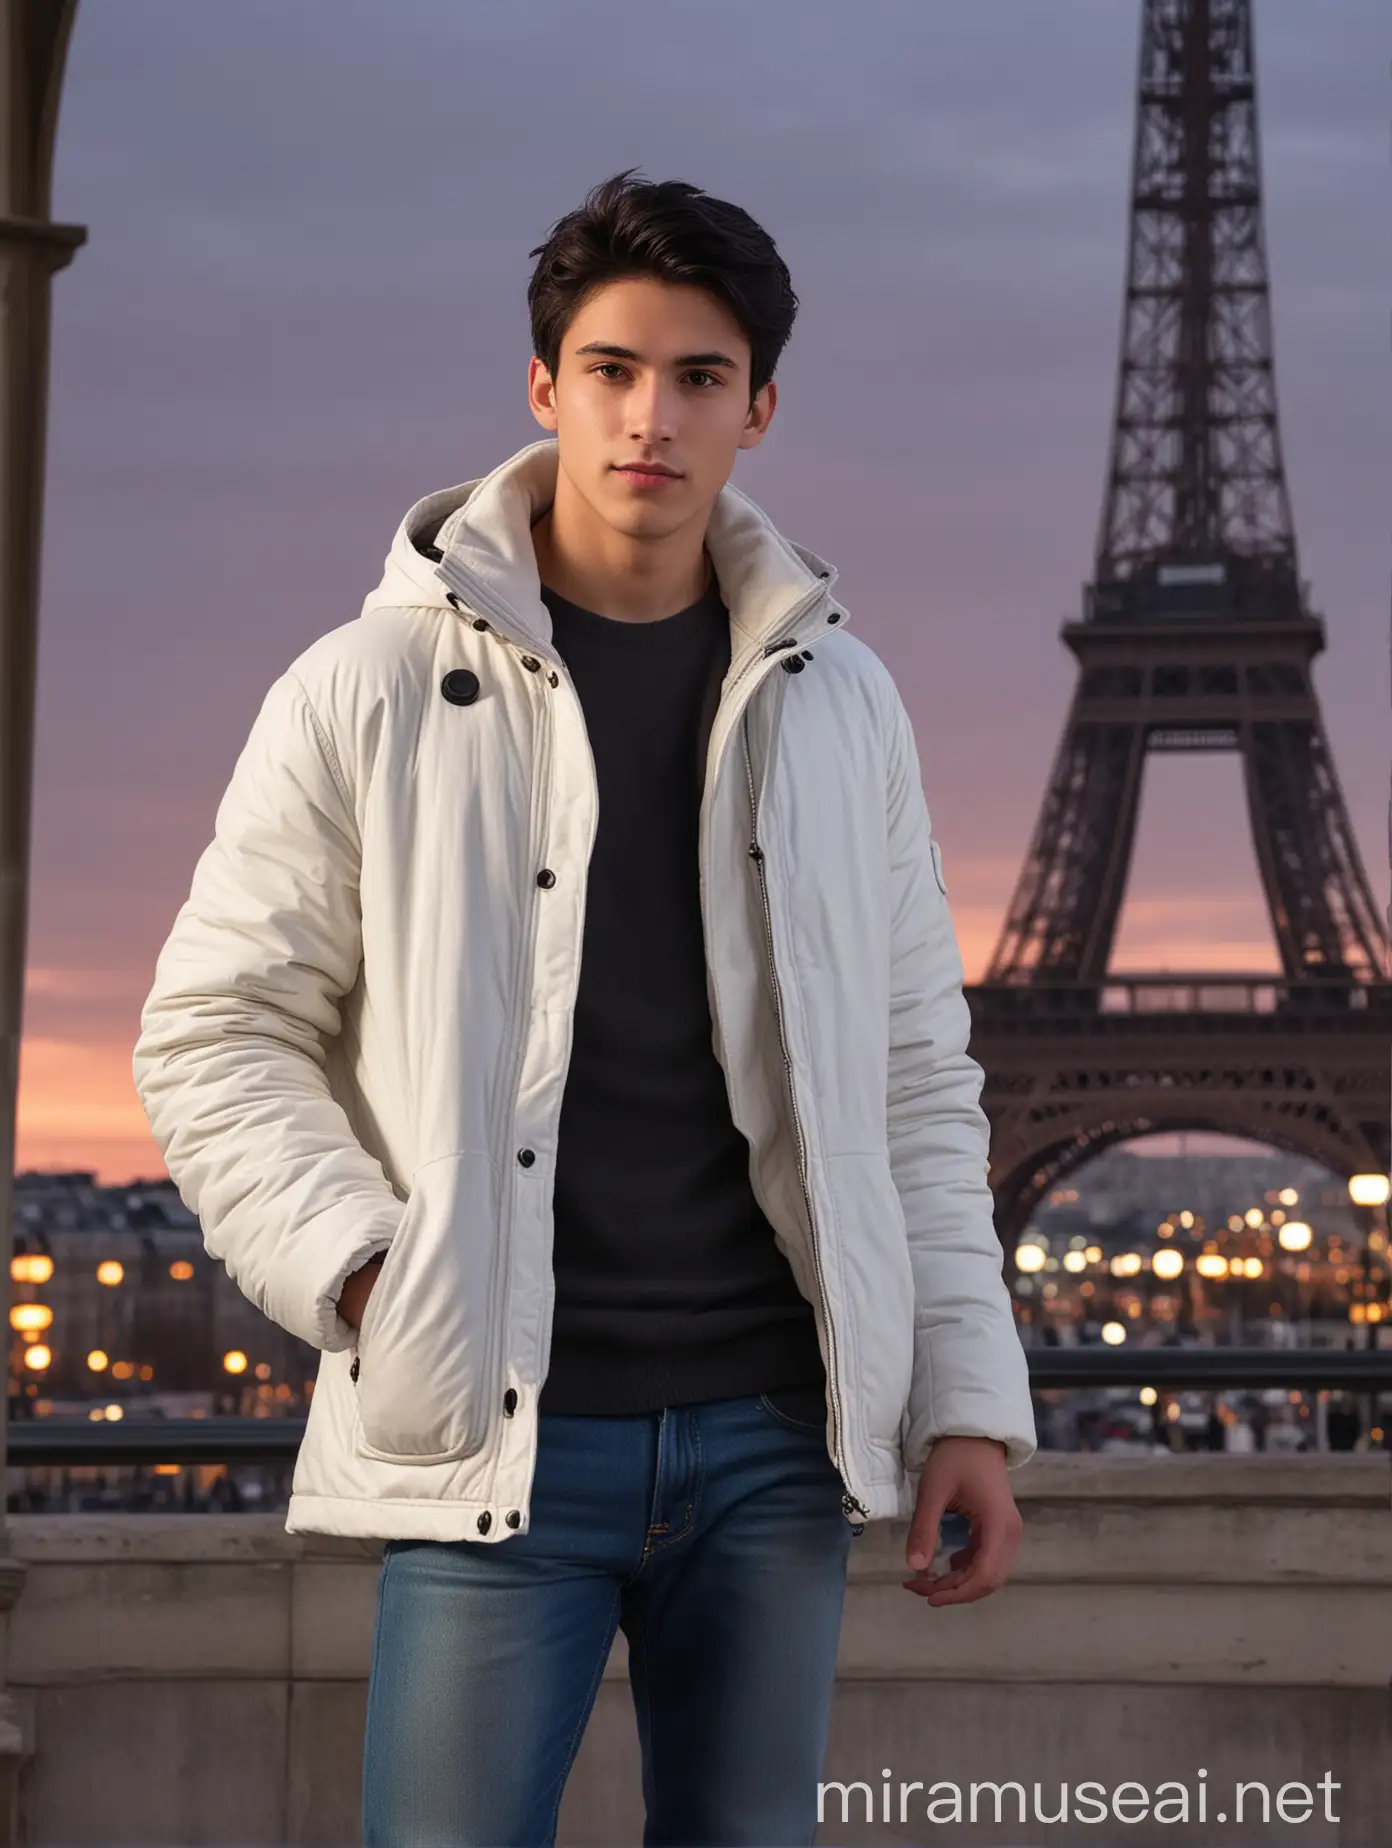 Stylish Young Man Poses at Eiffel Tower in Winter Night